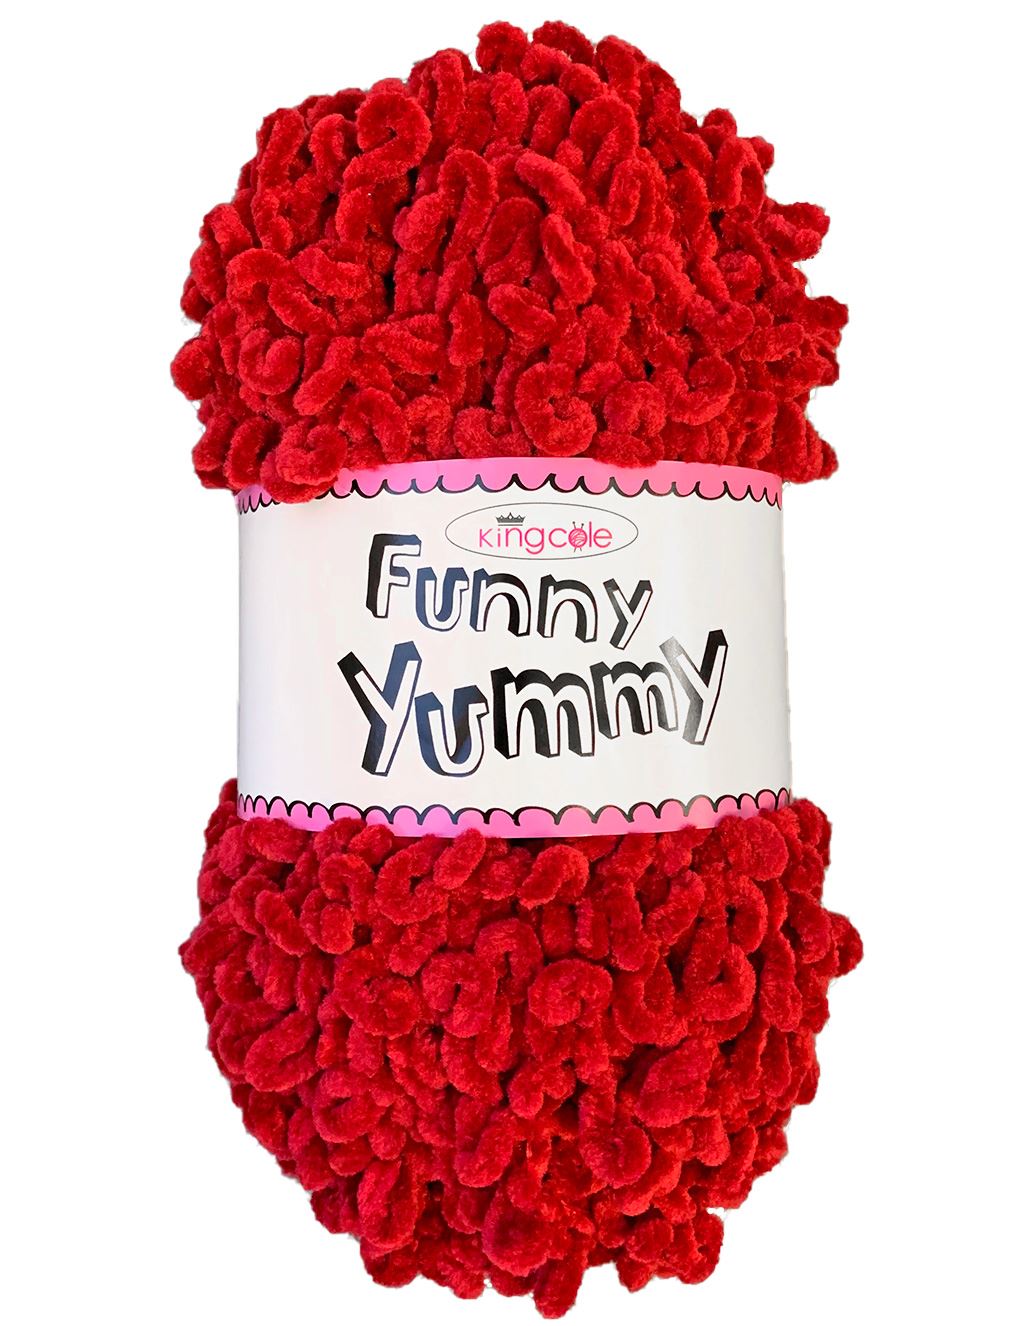 King Cole Funny Yummy Red (4148) chenille yarn - 100g